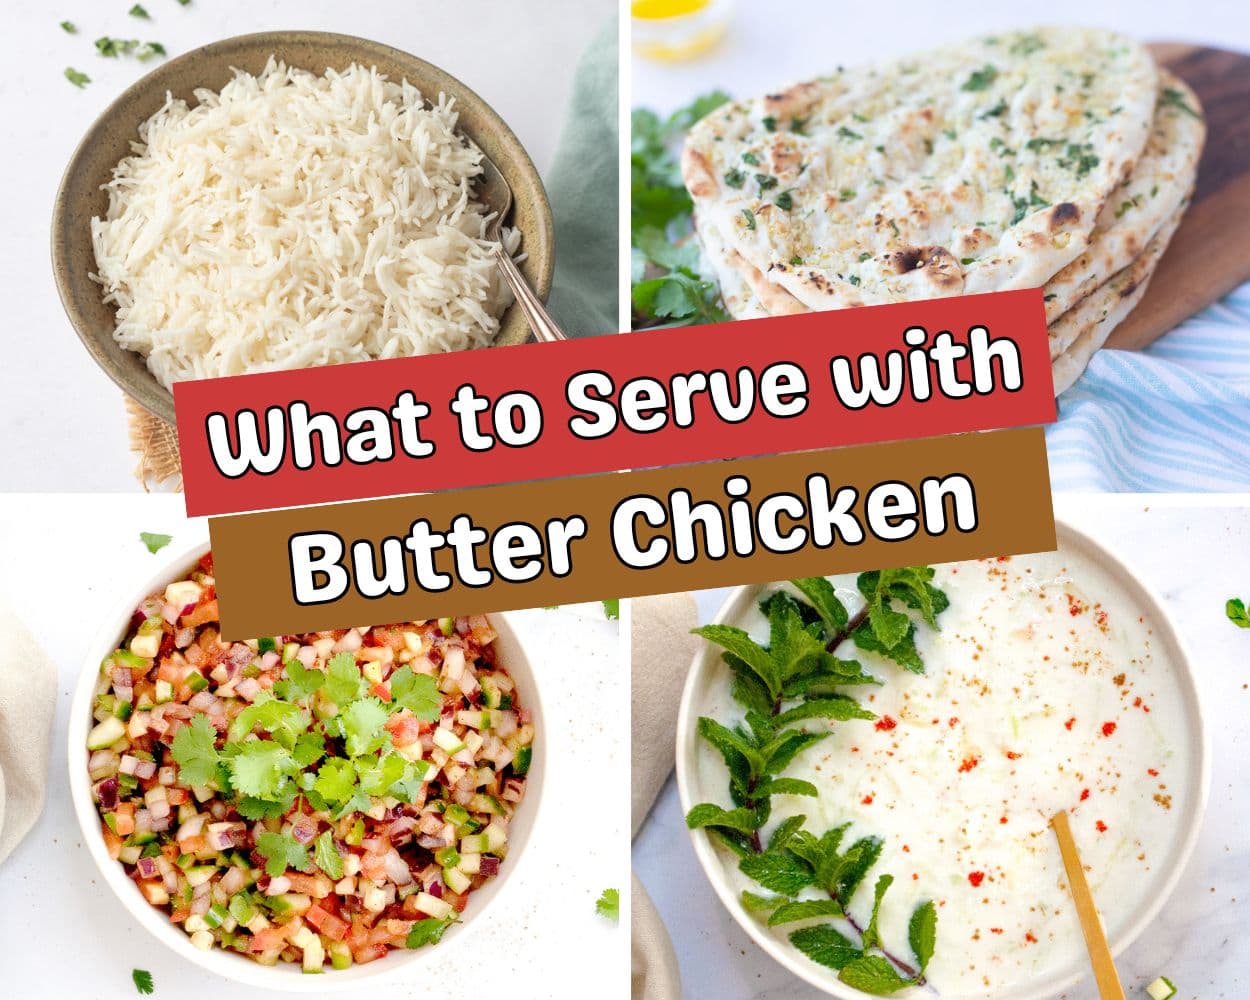 What to serve with Butter Chicken - 20 Easy side dishes